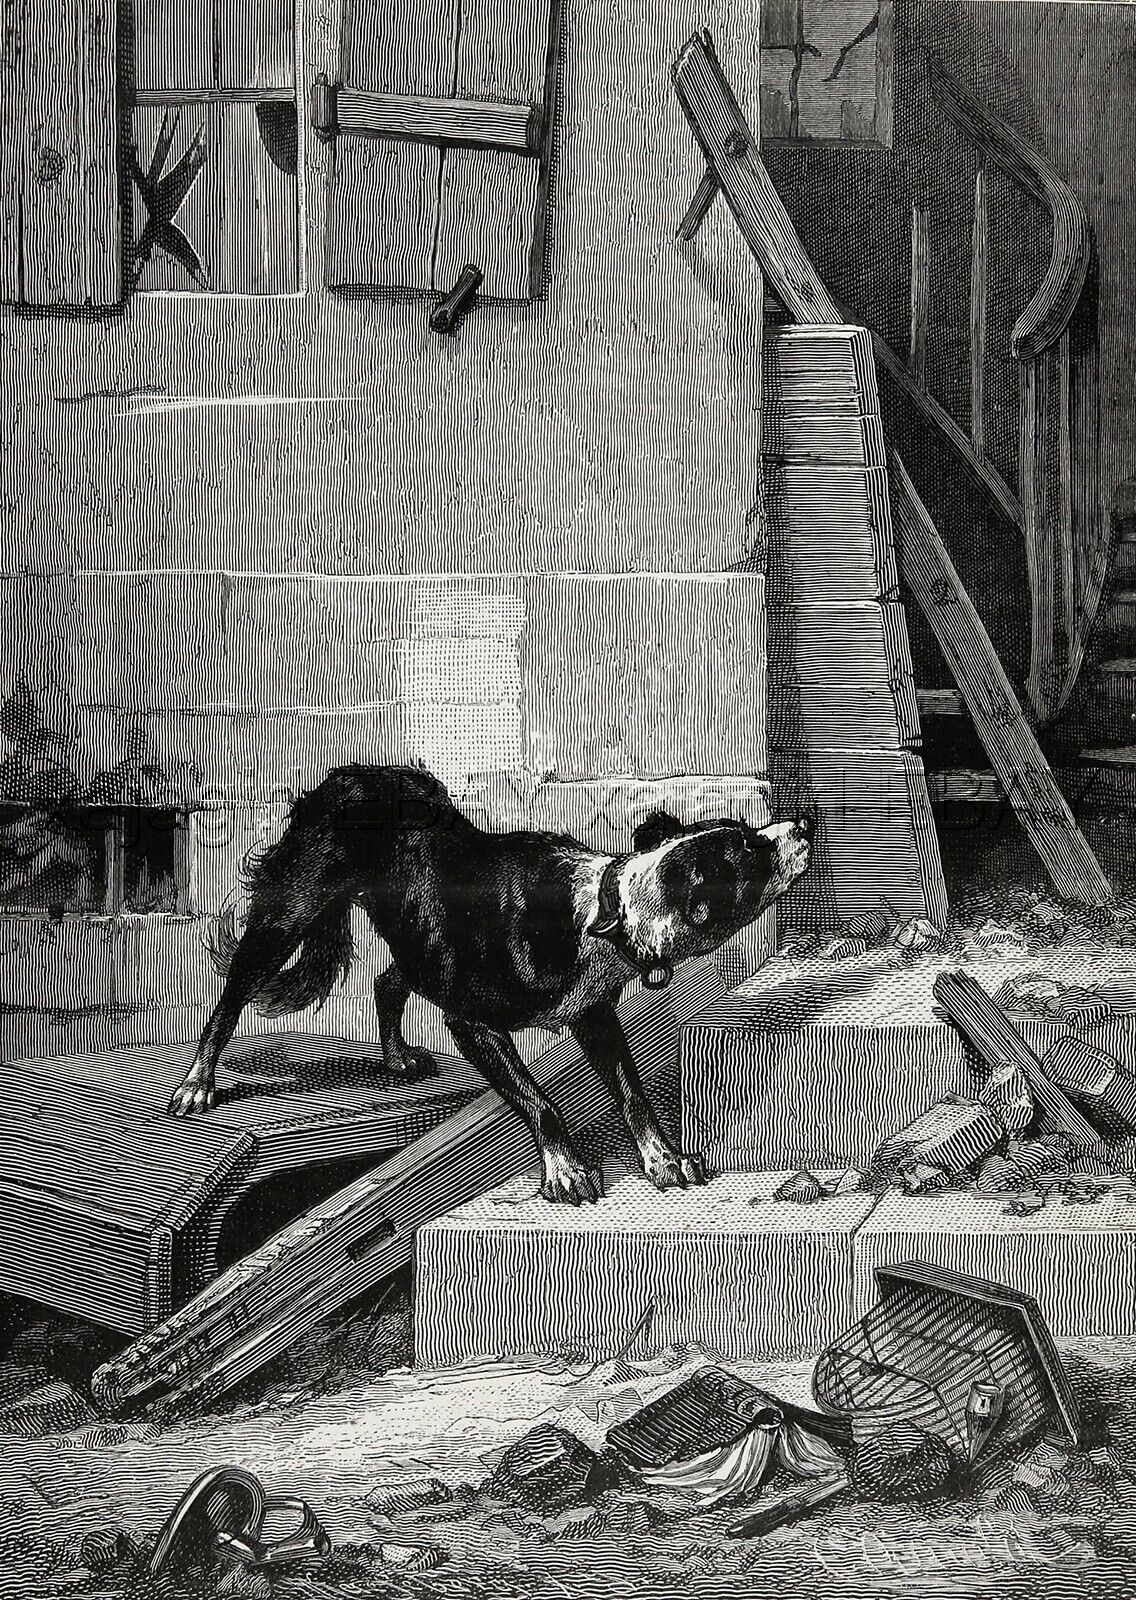 Dog Border Collie Abandoned, Animal Cruelty Rescue, Large 1880s Antique Print